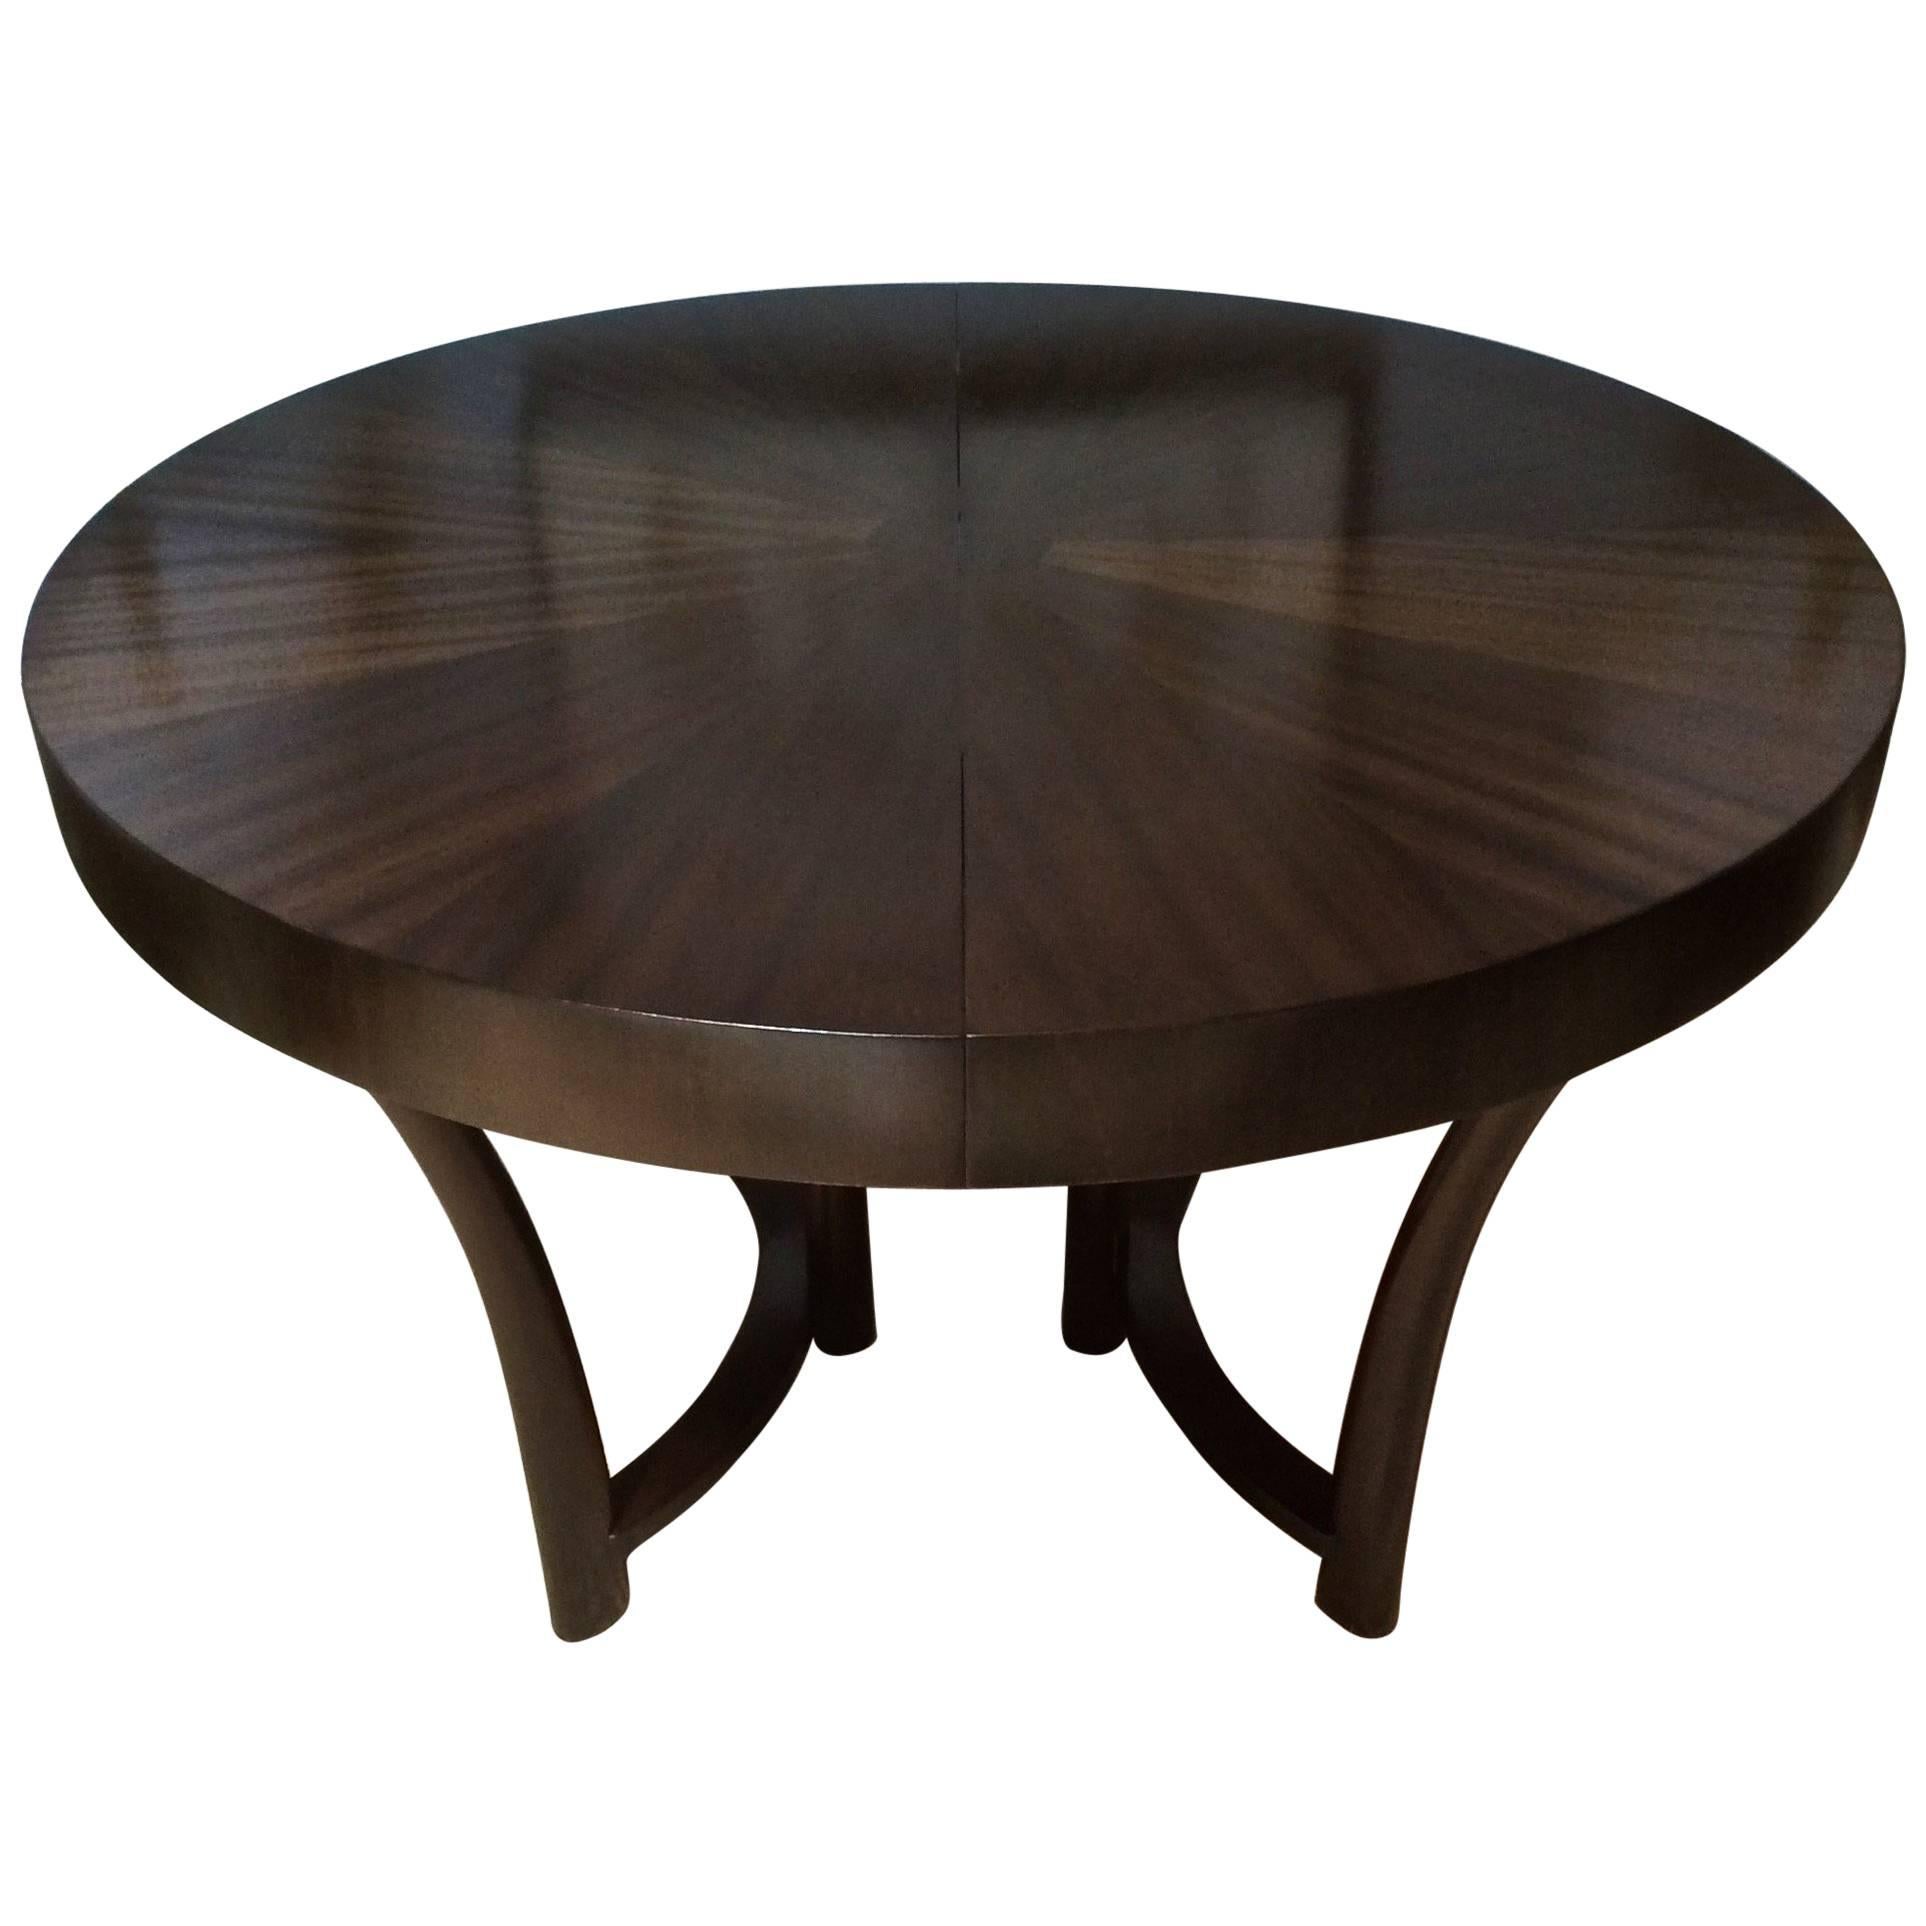 T. H. Robsjohn-Gibbings Walnut Dining Table, with One Leaf for Widdicomb